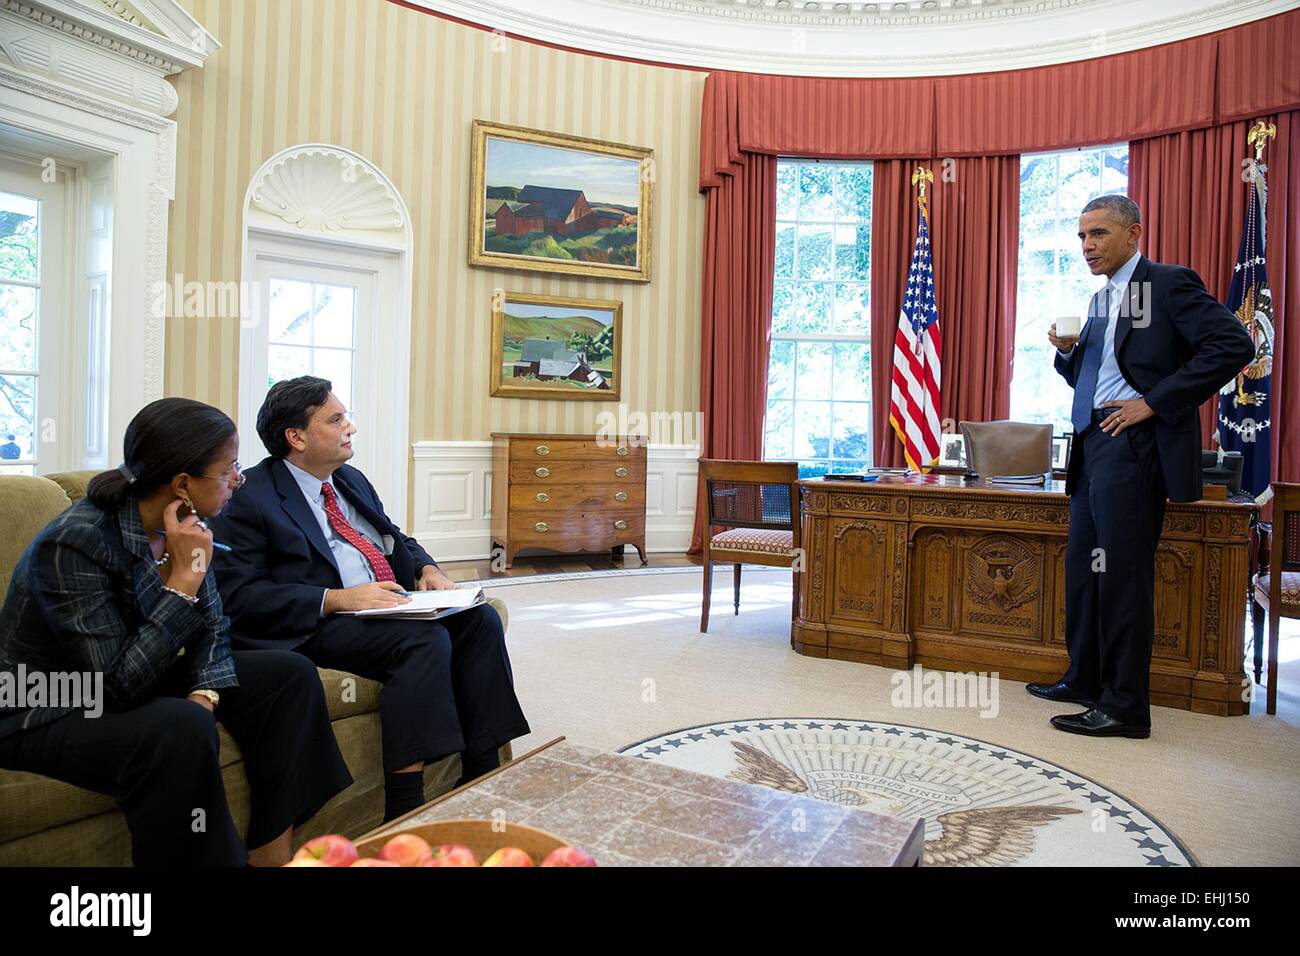 US President Barack Obama talks with National Security Advisor Susan E. Rice and Ebola Response Coordinator Ron Klain following a conference call with health care workers in Africa regarding Ebola in the Oval Office of the White House October 28, 2014 in Washington, DC. Stock Photo